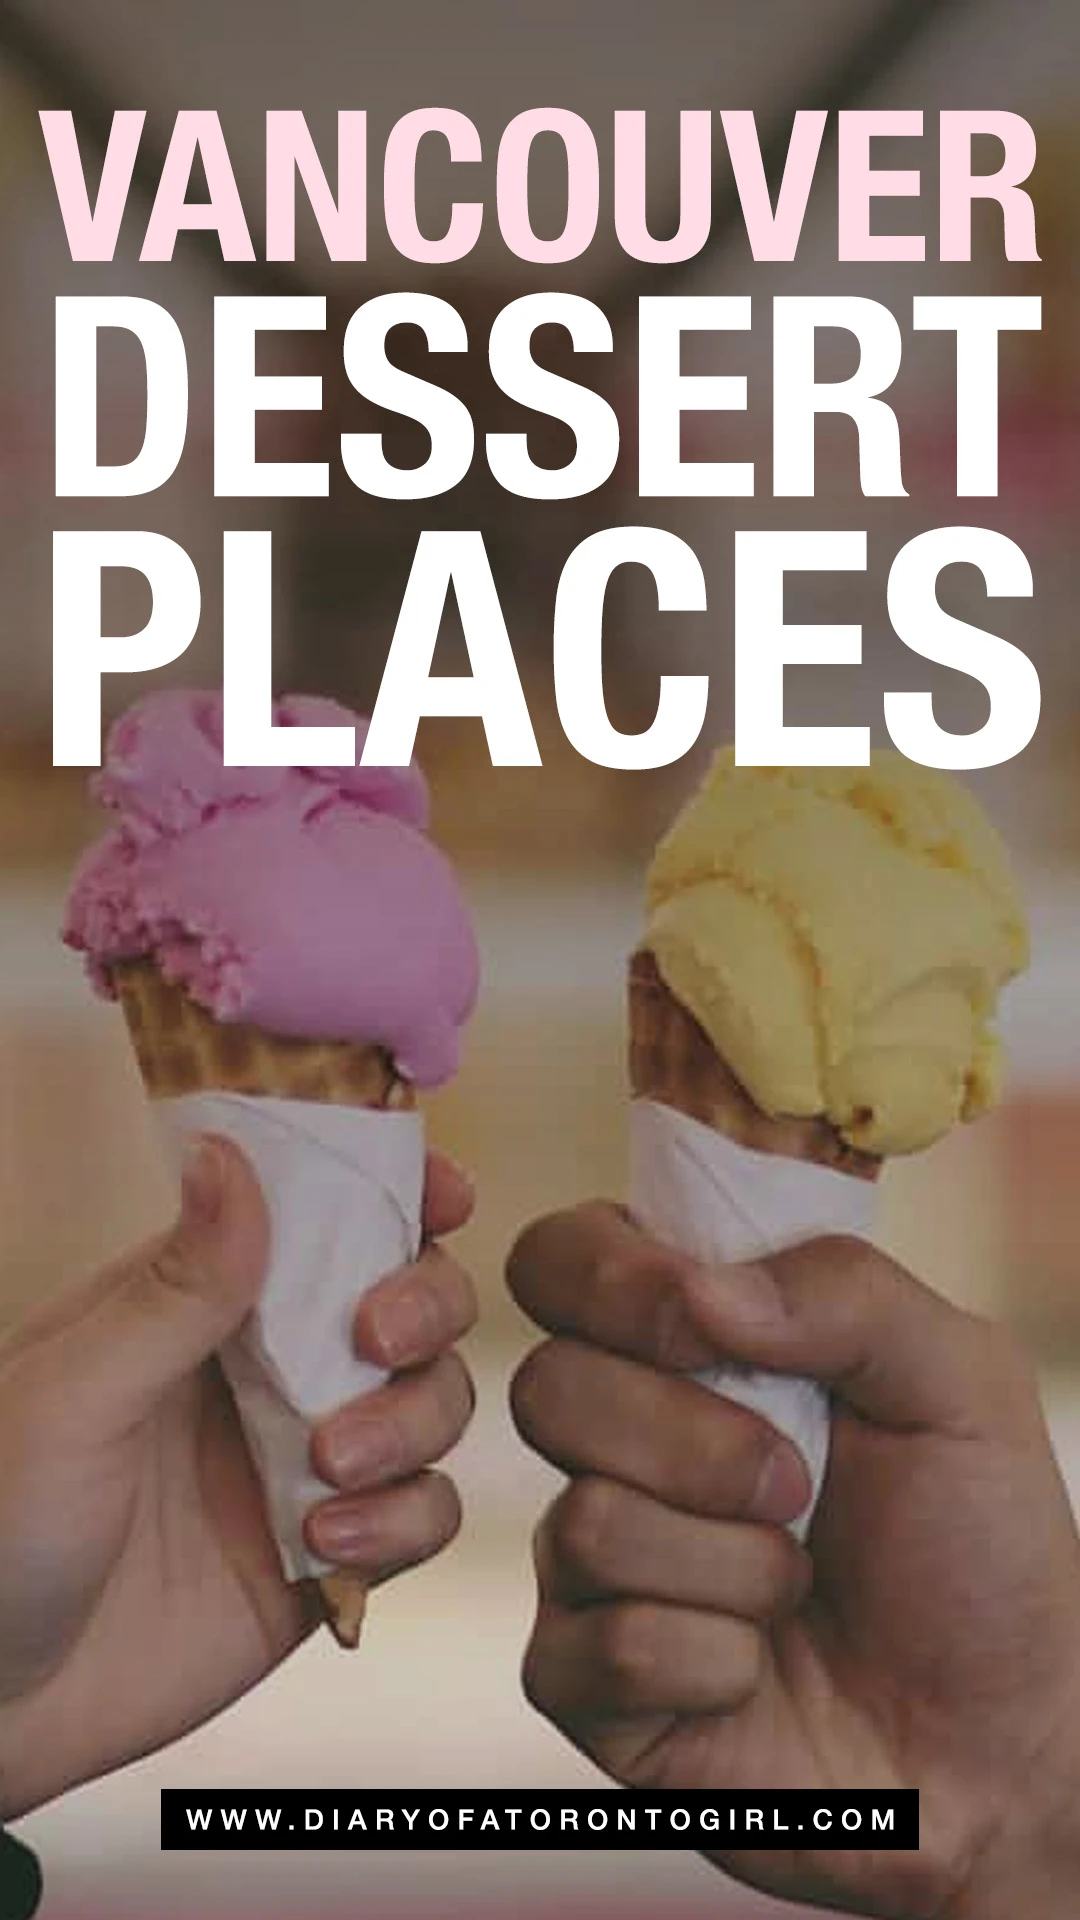 The best dessert places in Vancouver, including everything from fresh scoops of unique ice cream flavours to decadent and handcrafted doughnuts!